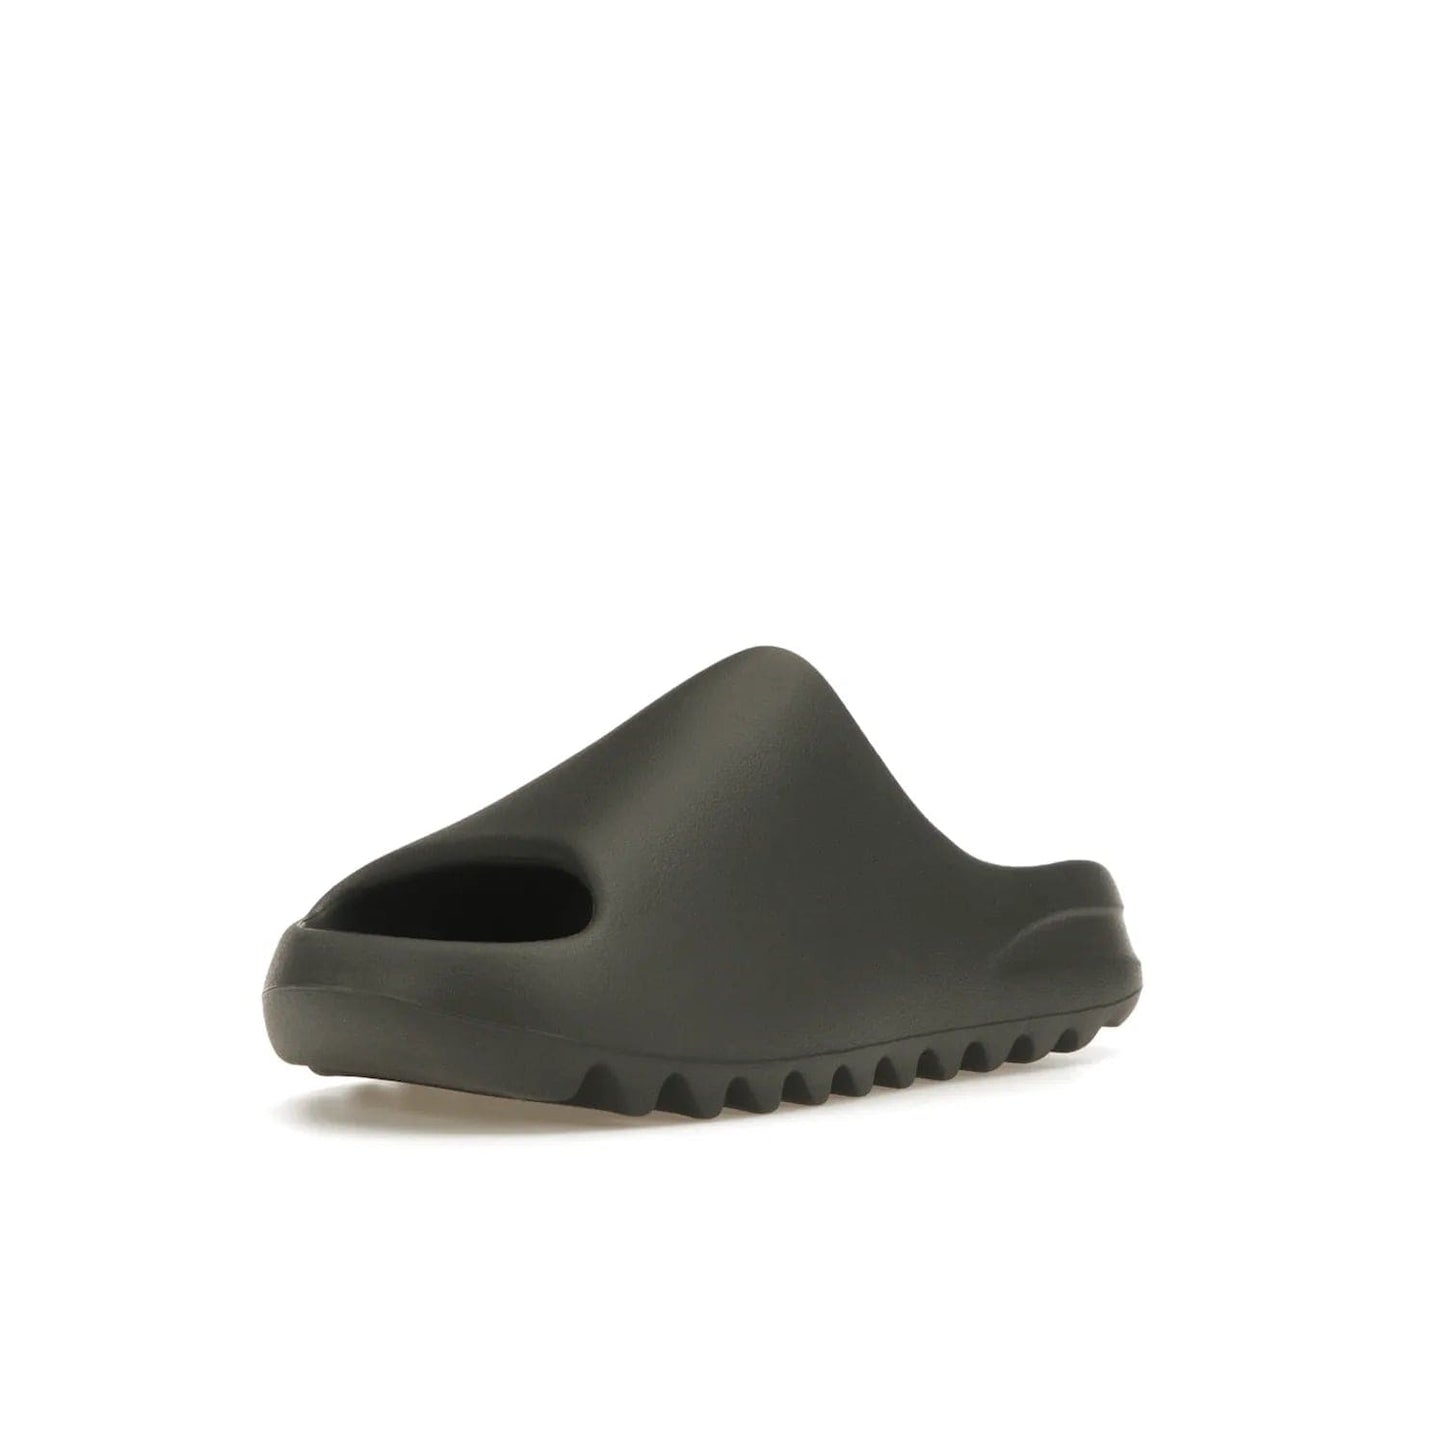 adidas Yeezy Slide Granite - Image 14 - Only at www.BallersClubKickz.com - Introducing the adidas Yeezy Slide Granite with a sleek, soft-to-touch one-piece upper – perfect for making a statement with its minimalistic design and luxurious comfort. Get yours now for only $70.